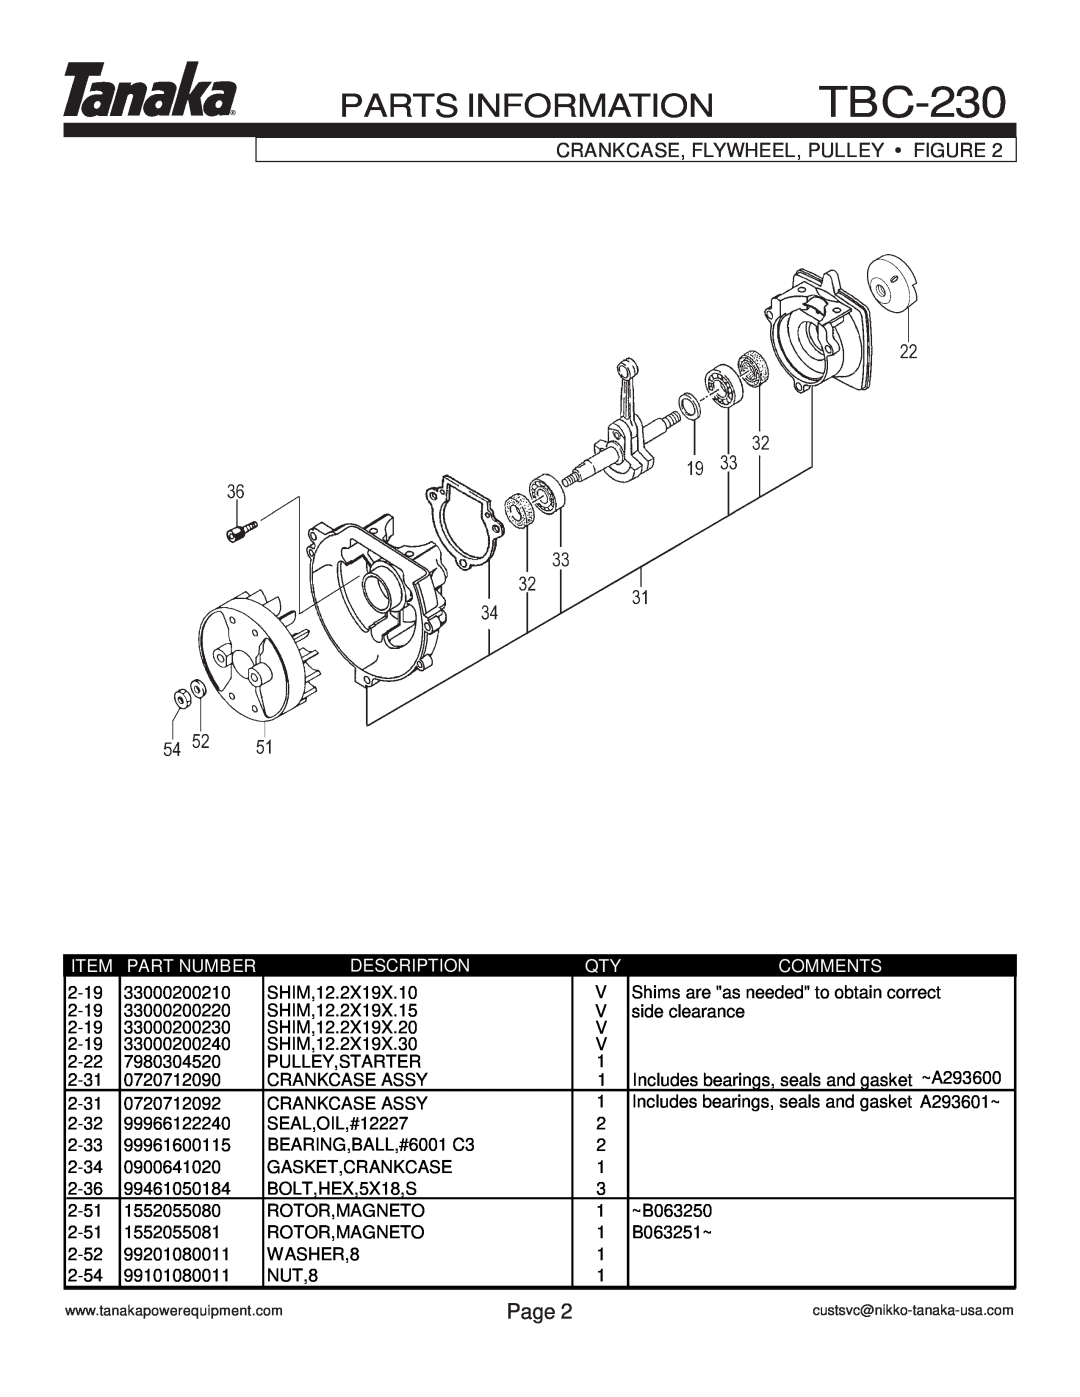 Tanaka TBC-230 manual Parts Information, Crankcase, Flywheel, Pulley Figure, Page, Part Number, Description, Comments 